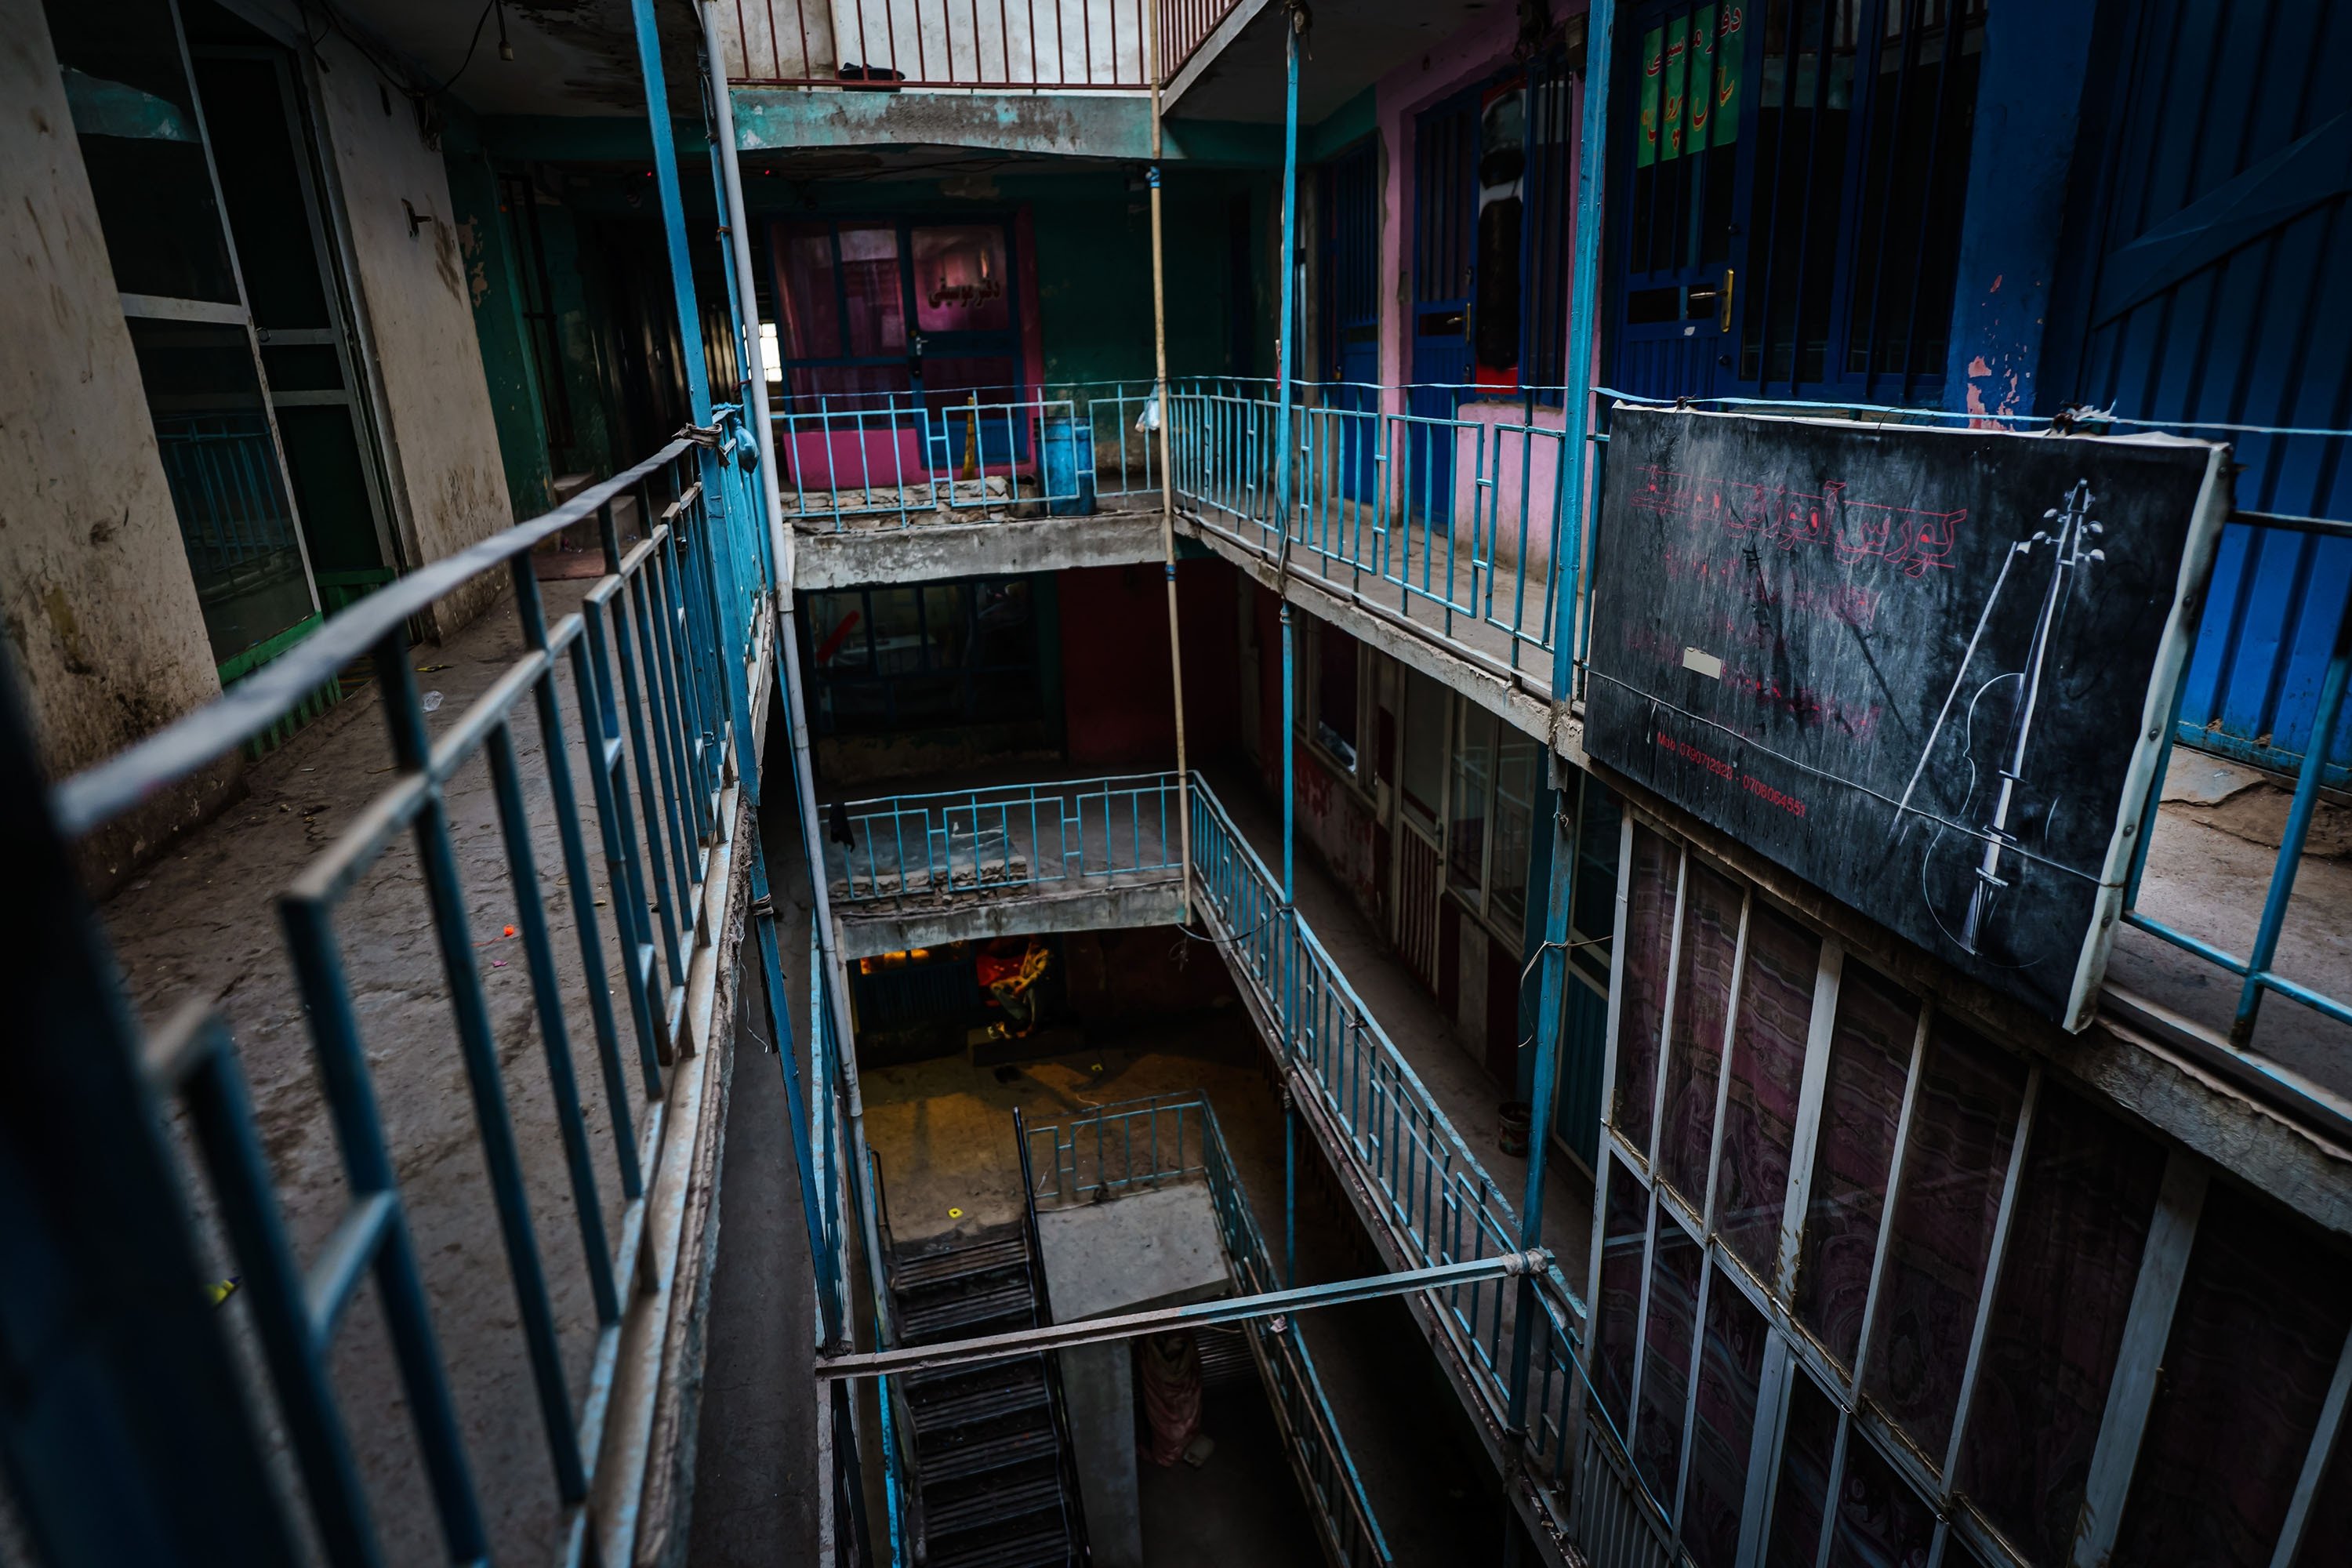 The Ghos al Din building in the Shor Bazaar area sits empty after its resident musicians and instrument makers fled or shuttered their stores after the Taliban took control of the country, in Kabul, Afghanistan, Thursday, Sept. 2, 2021. (Getty Images)